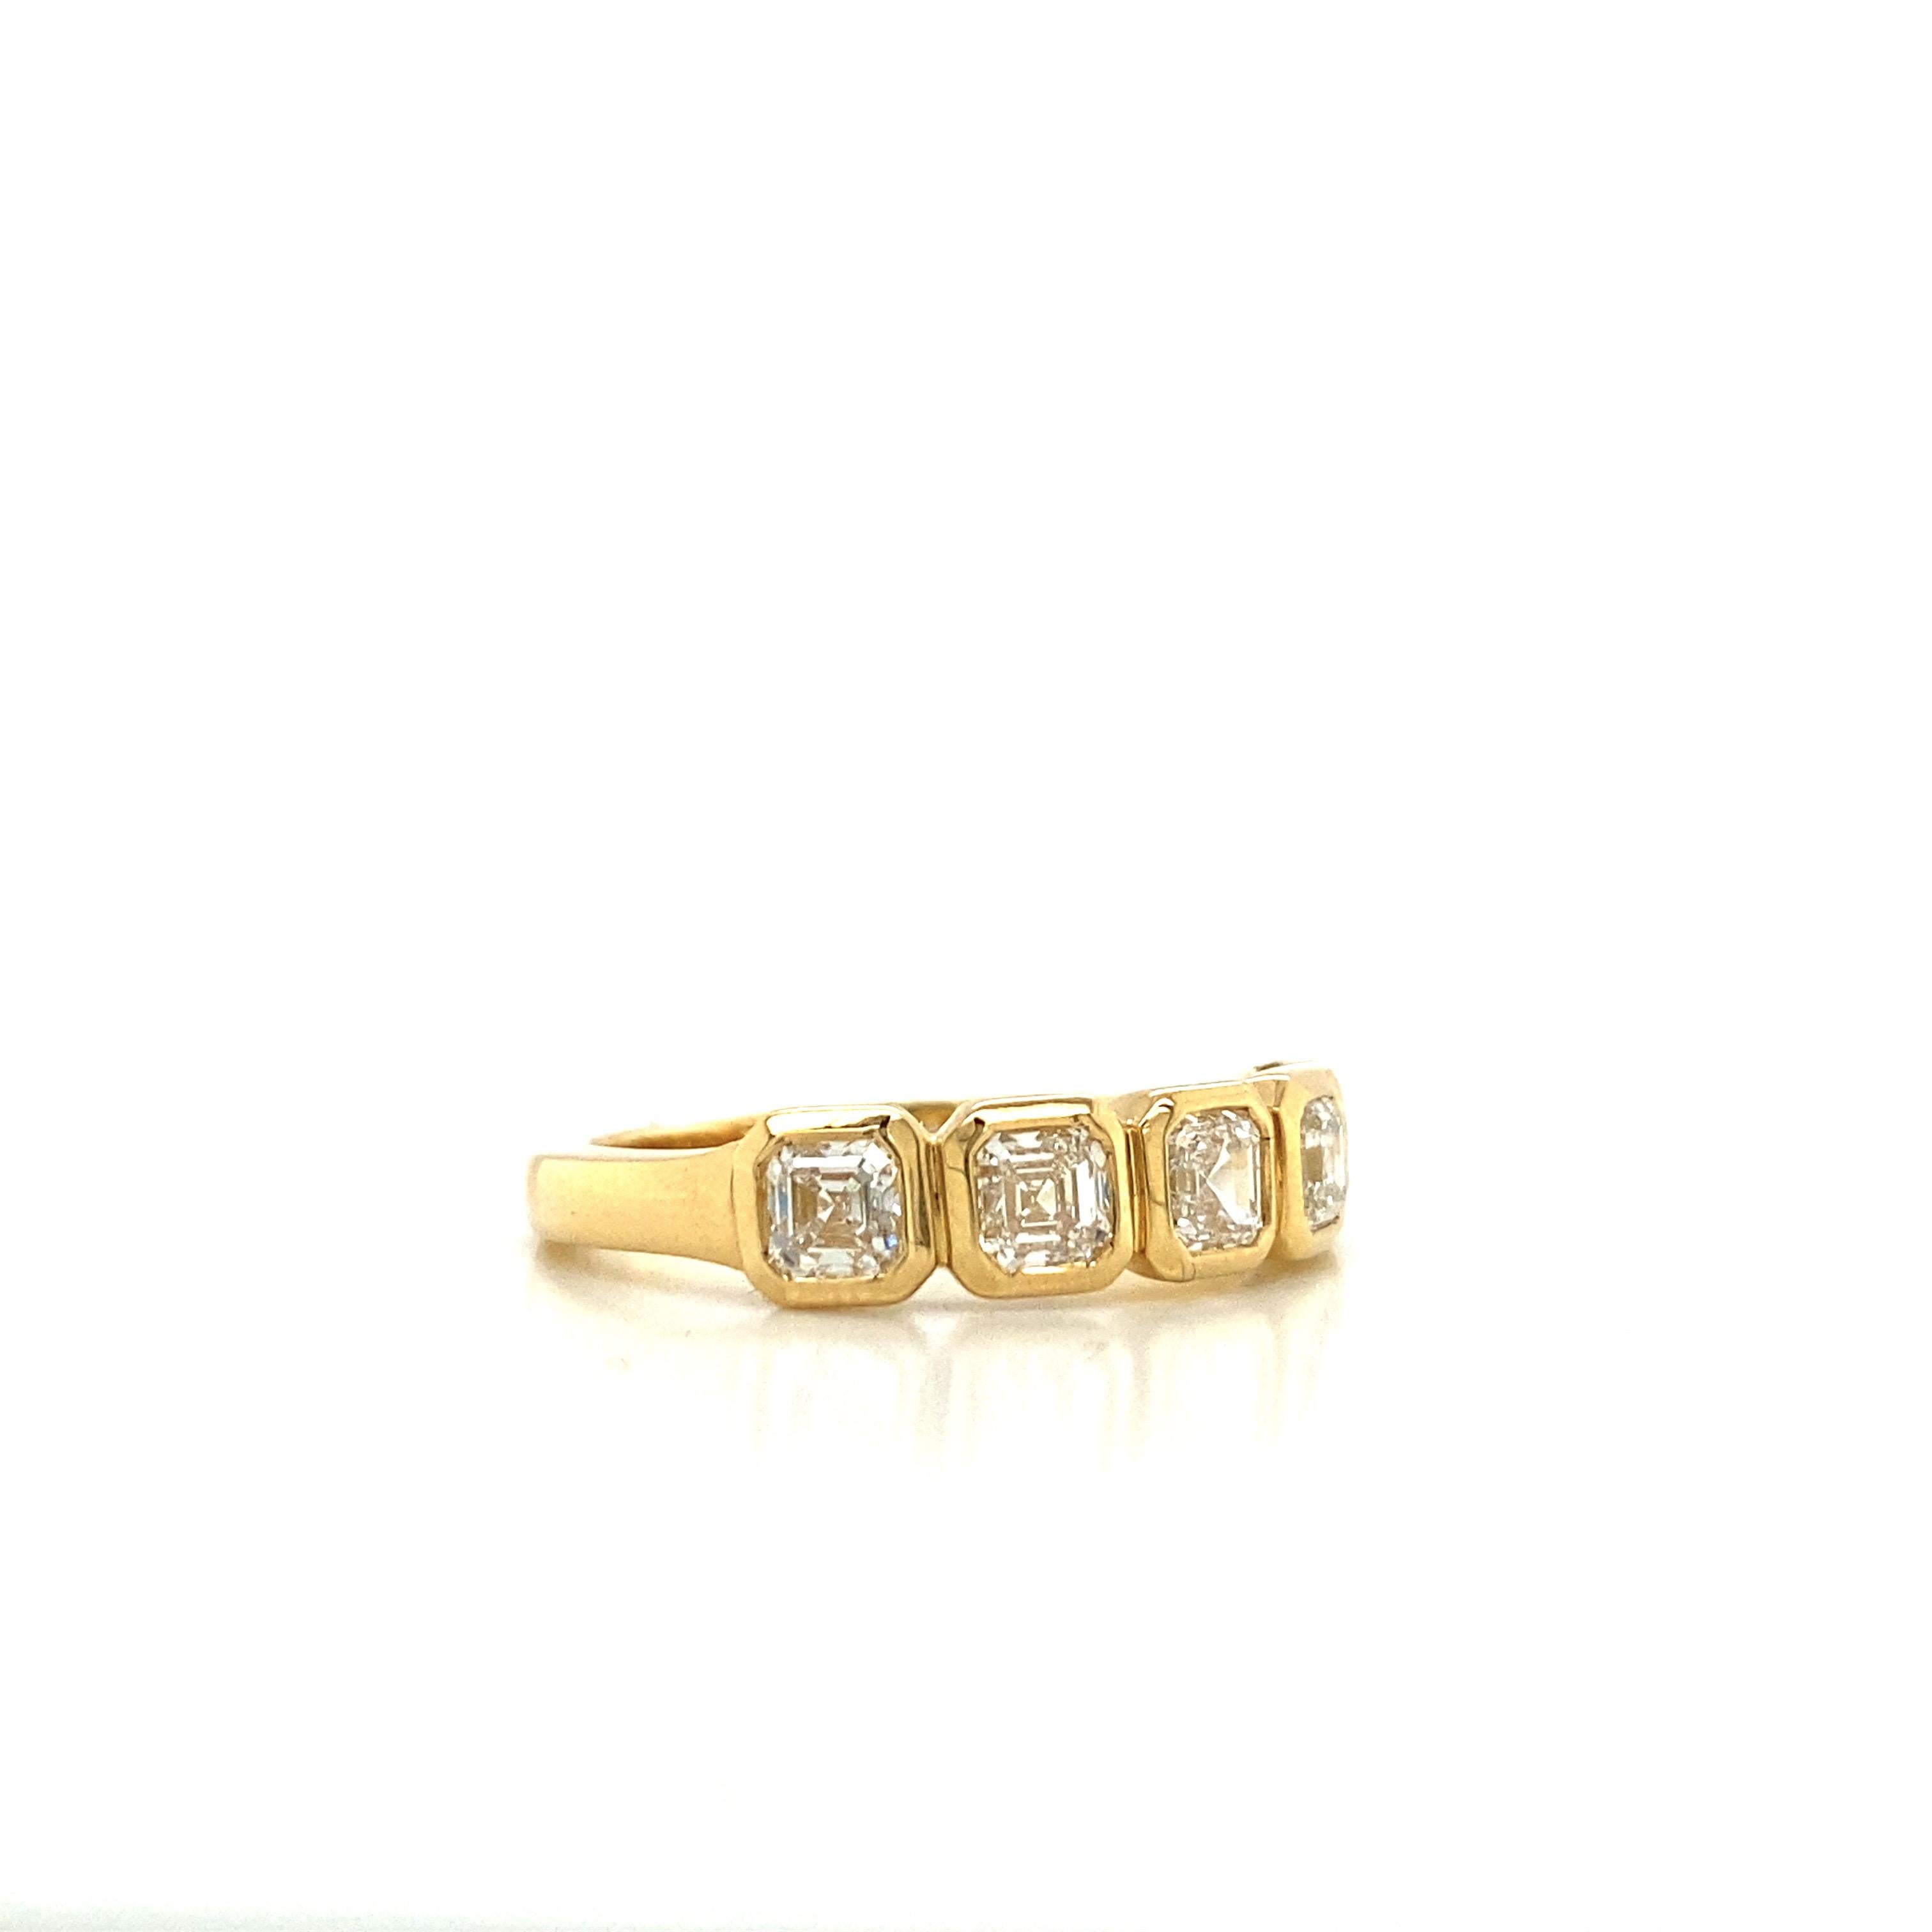 This Asscher Diamond Anniversary Band features 5 Asscher Diamonds, weighing 1.10 Total Carat Weight. These stones are set in a Bezel Setting that outlines the shape and corners, giving the ring a beautiful appearance. The diamonds are F Color, VS